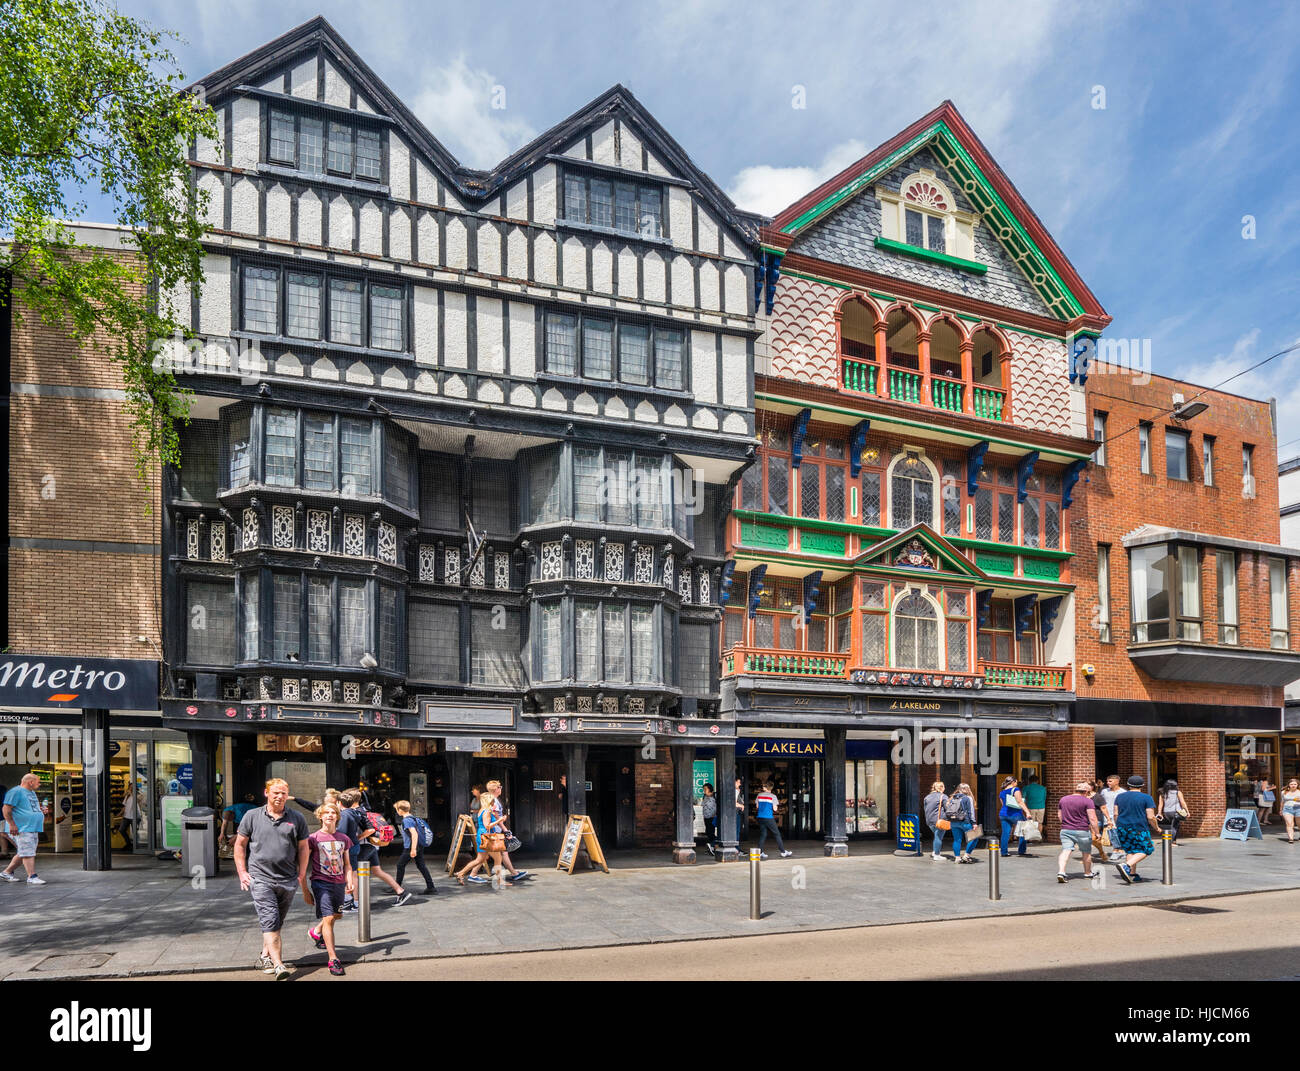 Great Britain, South West England, Devon, Exeter, venerable building facades at Exeter High Street Stock Photo